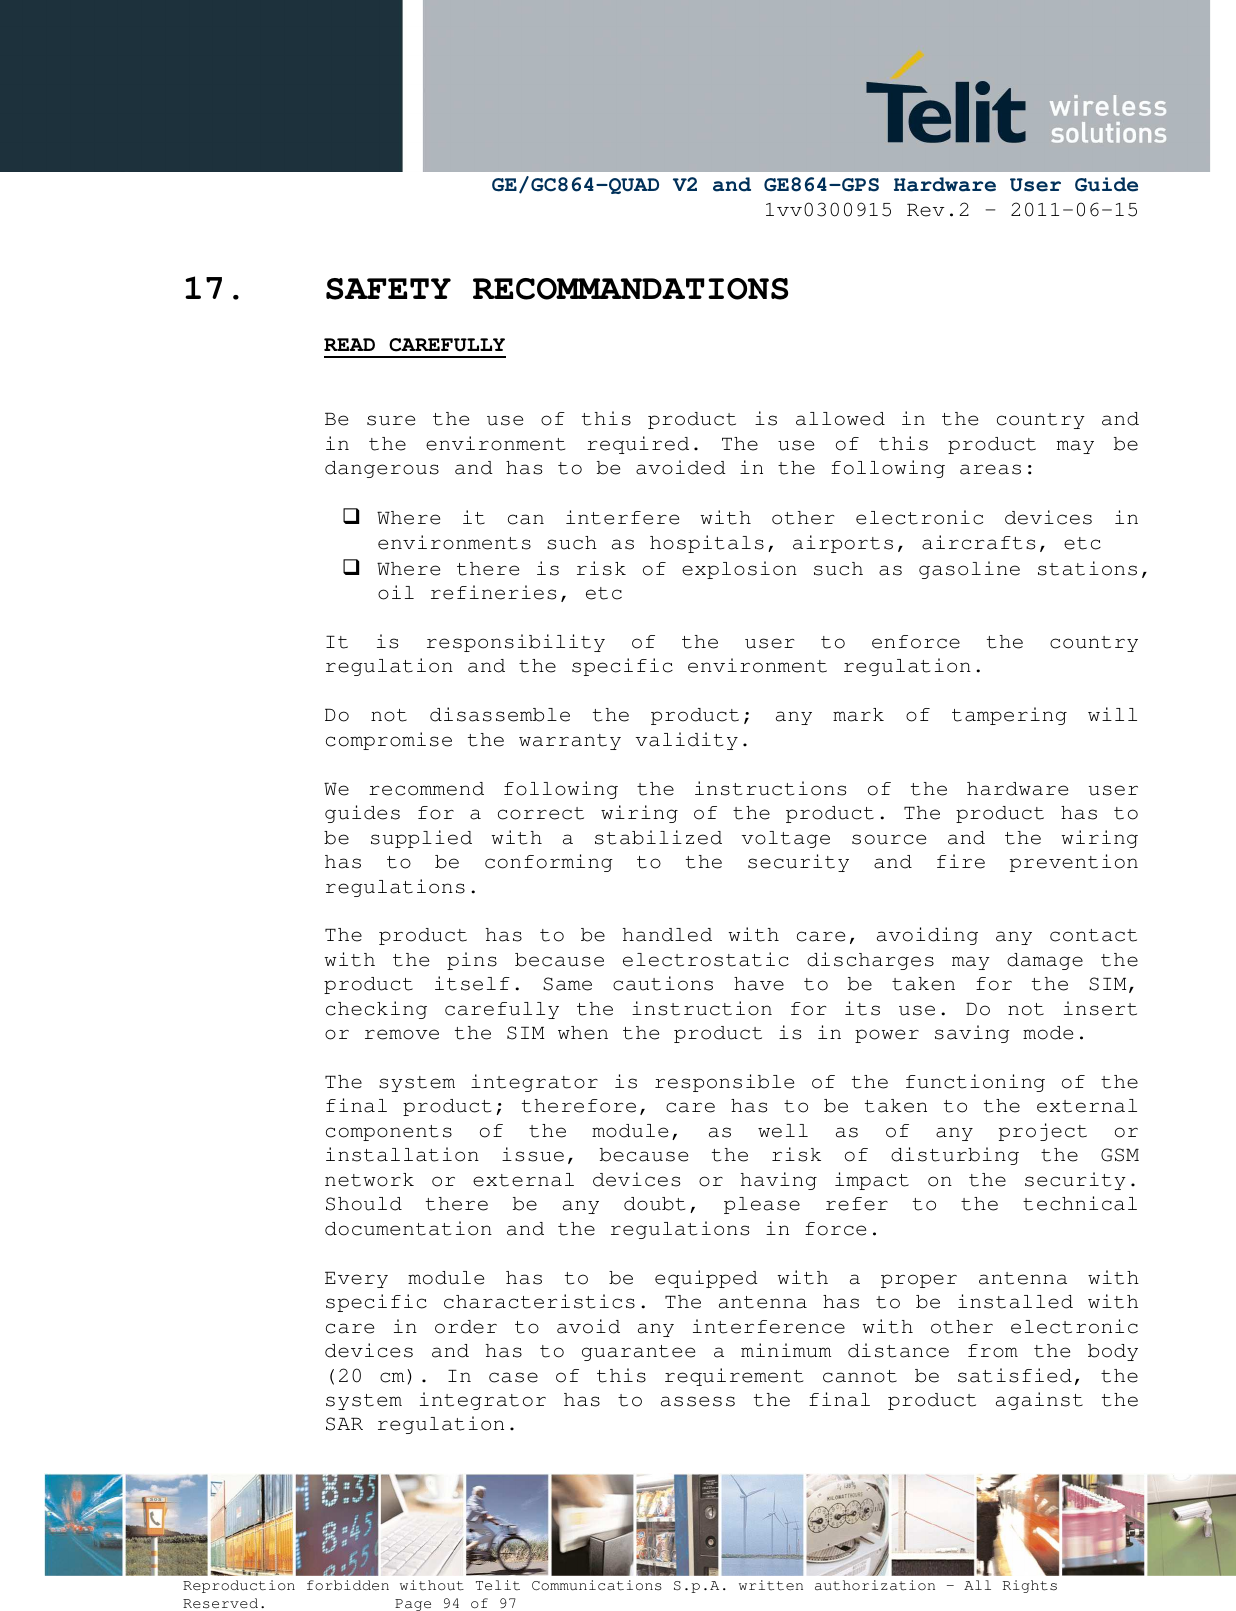      GE/GC864-QUAD V2 and GE864-GPS Hardware User Guide 1vv0300915 Rev.2 – 2011-06-15  Reproduction forbidden without Telit Communications S.p.A. written authorization - All Rights Reserved.    Page 94 of 97  17. SAFETY RECOMMANDATIONS READ CAREFULLY   Be sure the use of this product is allowed in the country and in  the  environment  required.  The  use  of  this  product  may  be dangerous and has to be avoided in the following areas:   Where  it  can  interfere  with  other  electronic  devices  in environments such as hospitals, airports, aircrafts, etc  Where there is risk of explosion such as gasoline stations, oil refineries, etc   It  is  responsibility  of  the  user  to  enforce  the  country regulation and the specific environment regulation.  Do  not  disassemble  the  product;  any  mark  of  tampering  will compromise the warranty validity.  We  recommend  following  the  instructions  of  the  hardware  user guides for a correct wiring of the product. The product has to be  supplied  with  a  stabilized  voltage  source  and  the  wiring has  to  be  conforming  to  the  security  and  fire  prevention regulations.  The product has to be handled with care, avoiding any contact with the  pins  because  electrostatic  discharges may damage  the product  itself.  Same  cautions  have  to  be  taken  for  the  SIM, checking carefully the instruction for its  use. Do  not insert or remove the SIM when the product is in power saving mode.  The system integrator is responsible of the functioning of the final product; therefore, care has to be taken to the external components  of  the  module,  as  well  as  of  any  project  or installation  issue,  because  the  risk  of  disturbing  the  GSM network or external devices or  having impact on  the  security. Should  there  be  any  doubt,  please  refer  to  the  technical documentation and the regulations in force.  Every  module  has  to  be  equipped  with  a  proper  antenna  with specific characteristics. The antenna has to be installed with care in  order  to  avoid any interference with other electronic devices and has to guarantee a minimum distance from the body (20 cm). In case of this requirement cannot be satisfied, the system integrator has to  assess  the final product  against the SAR regulation. 